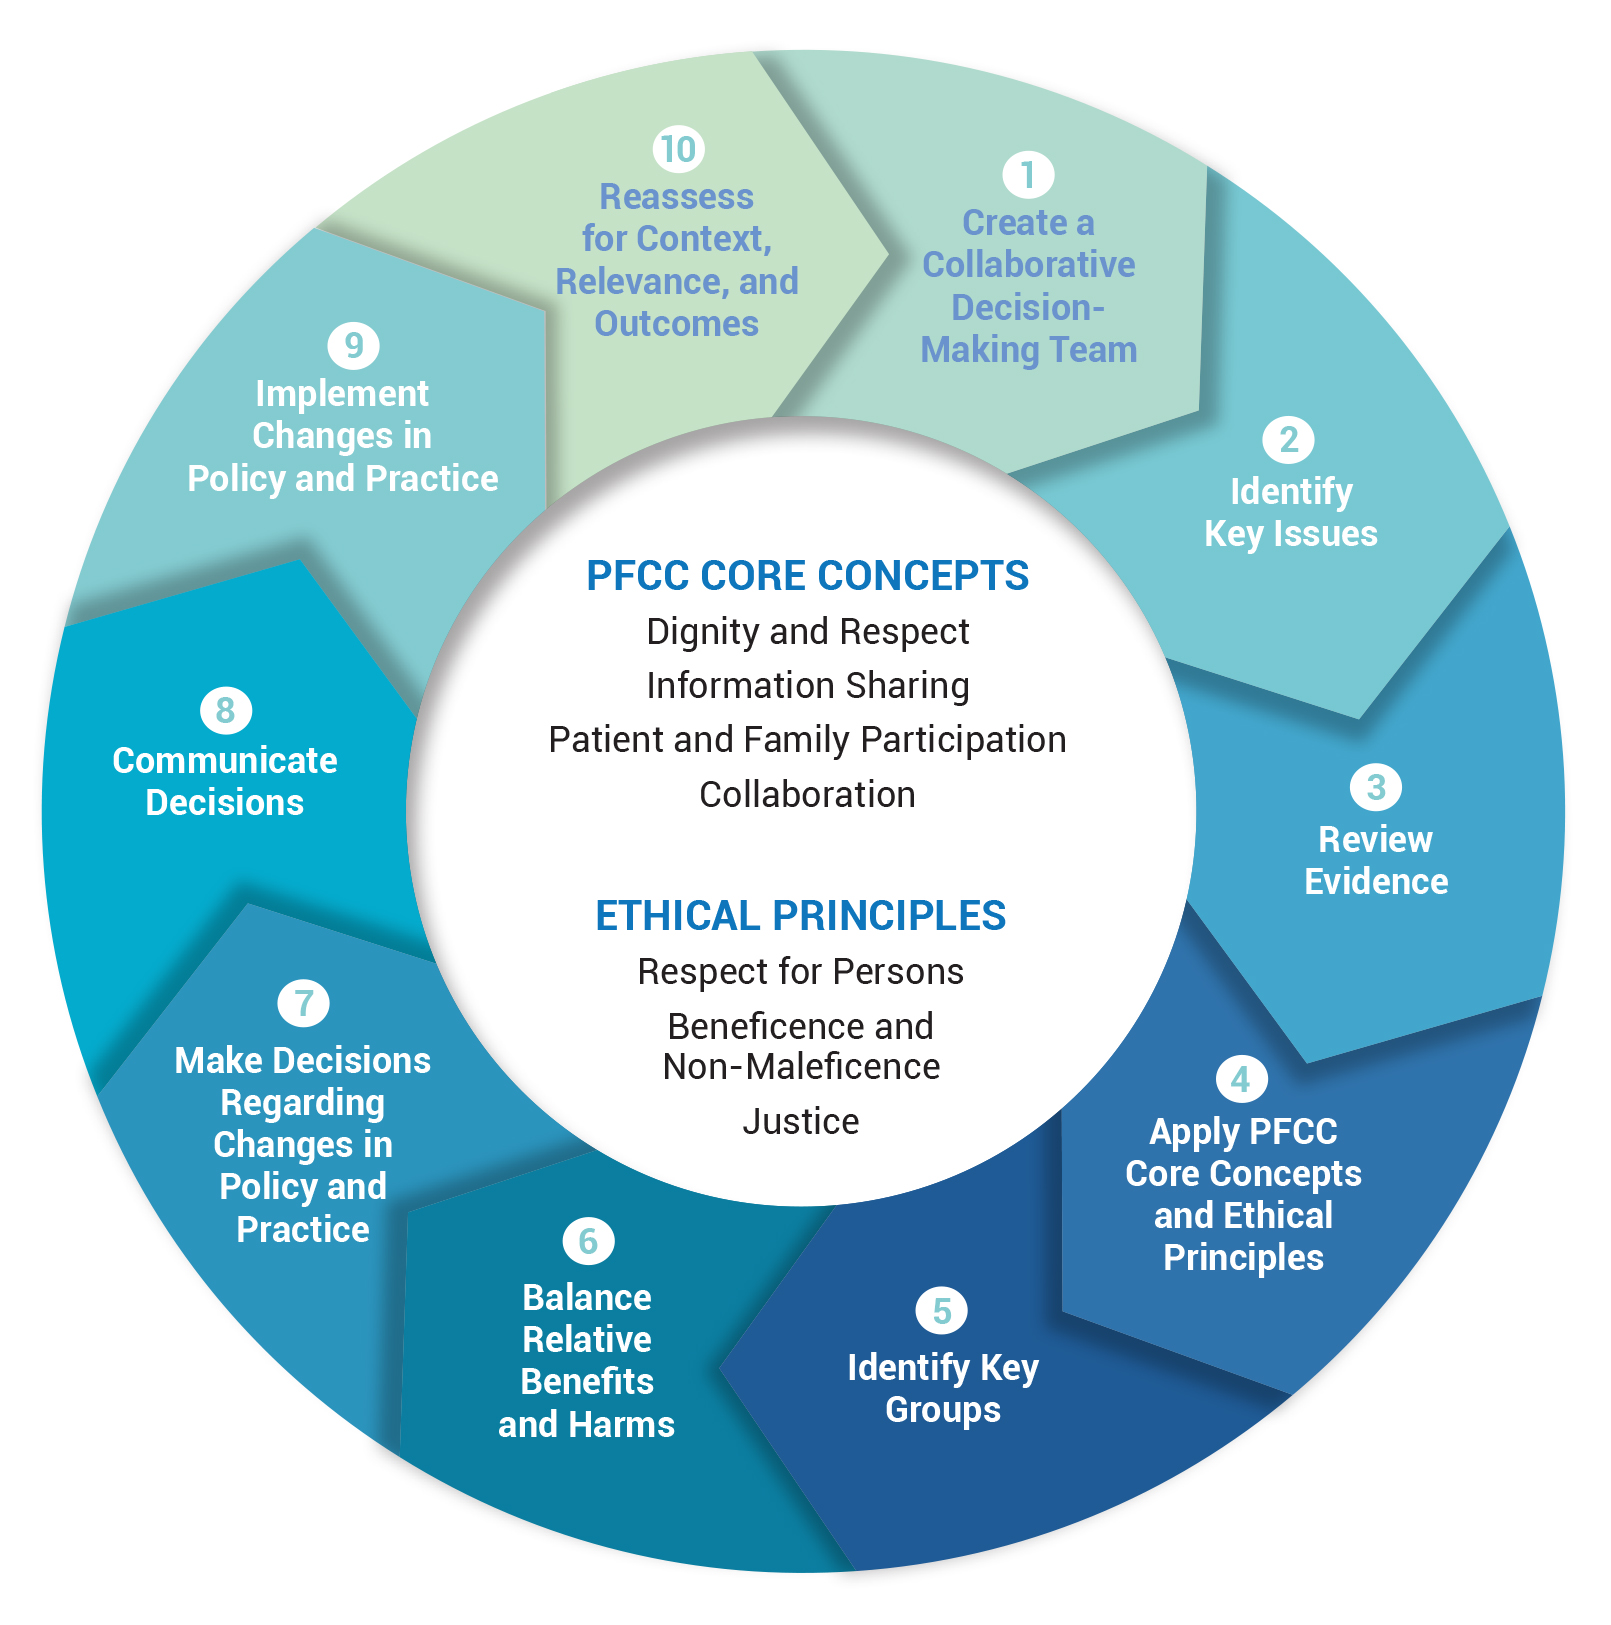 An Iterative Process for Decision-Making Within a Patient- and Family-Centered Ethical Framework